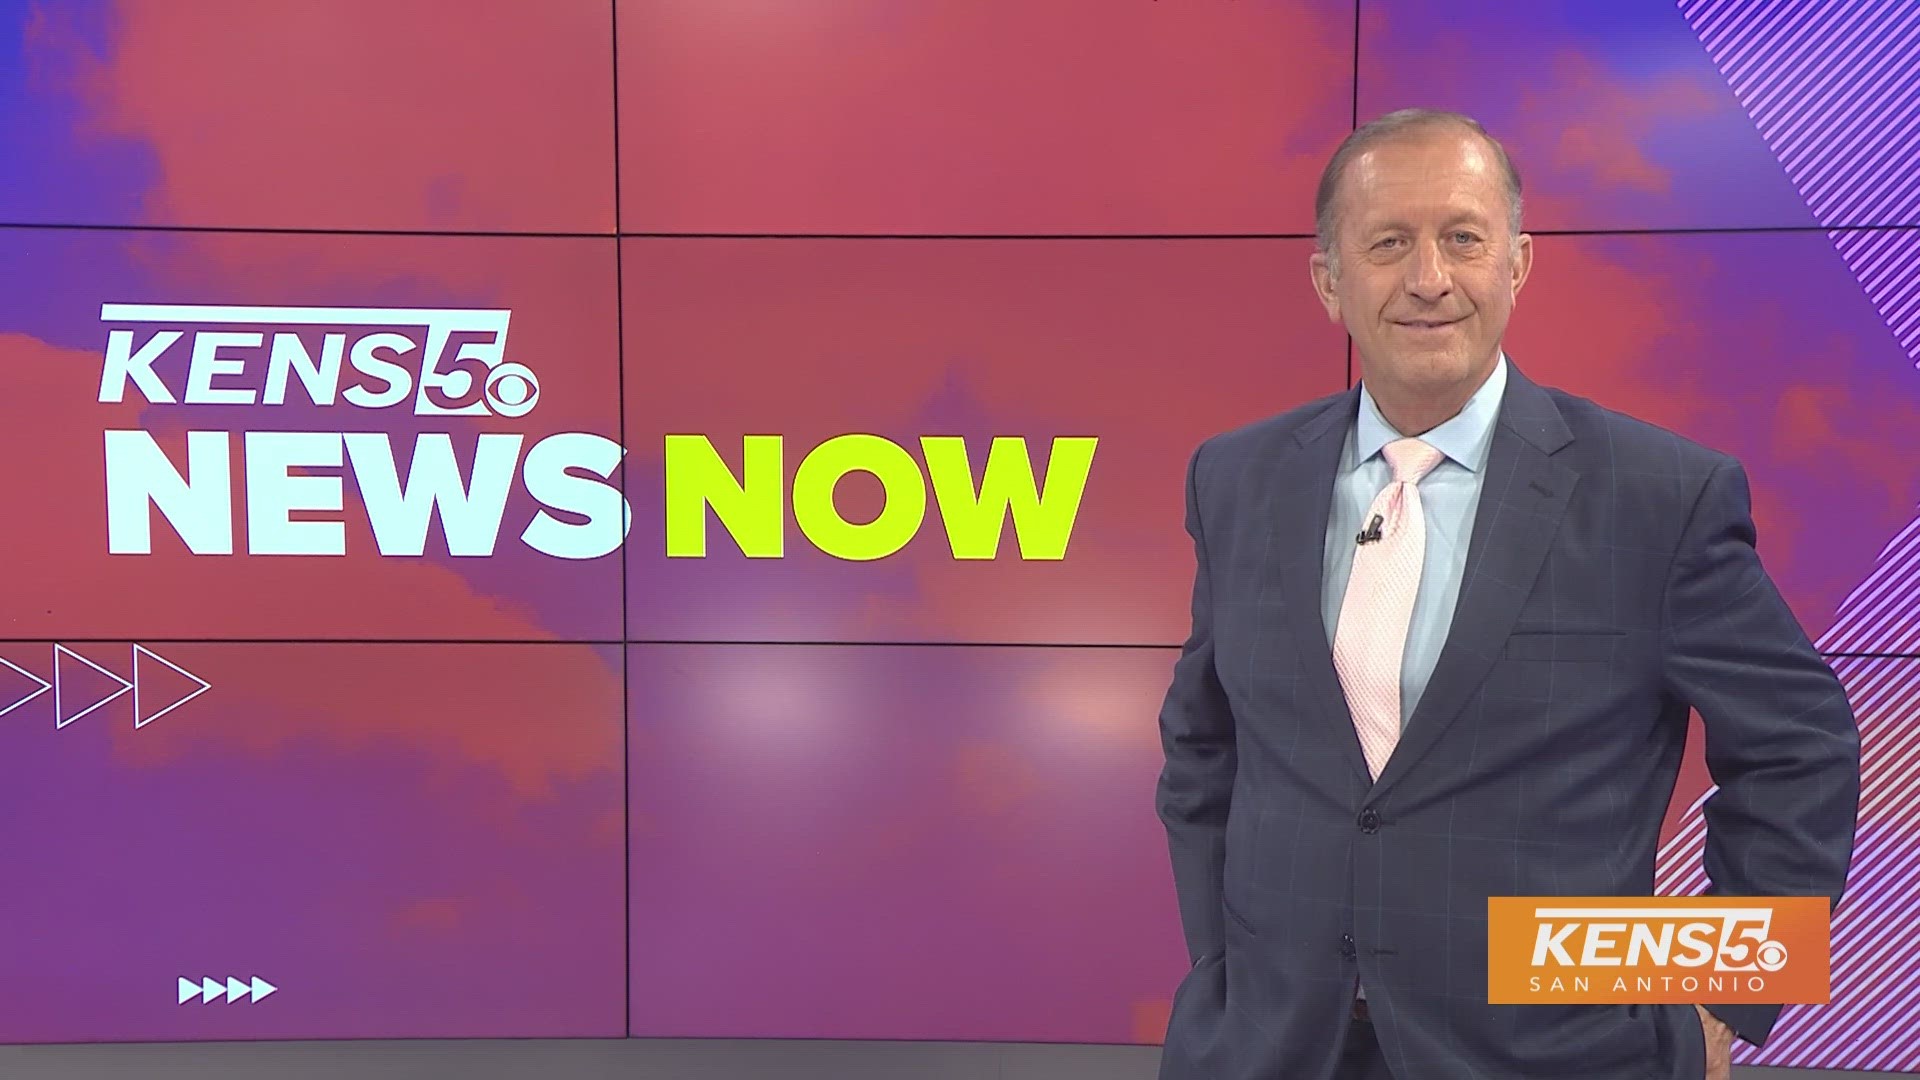 Follow us here to get the latest top headlines with the KENS 5 News team every weekday on KENS 5!